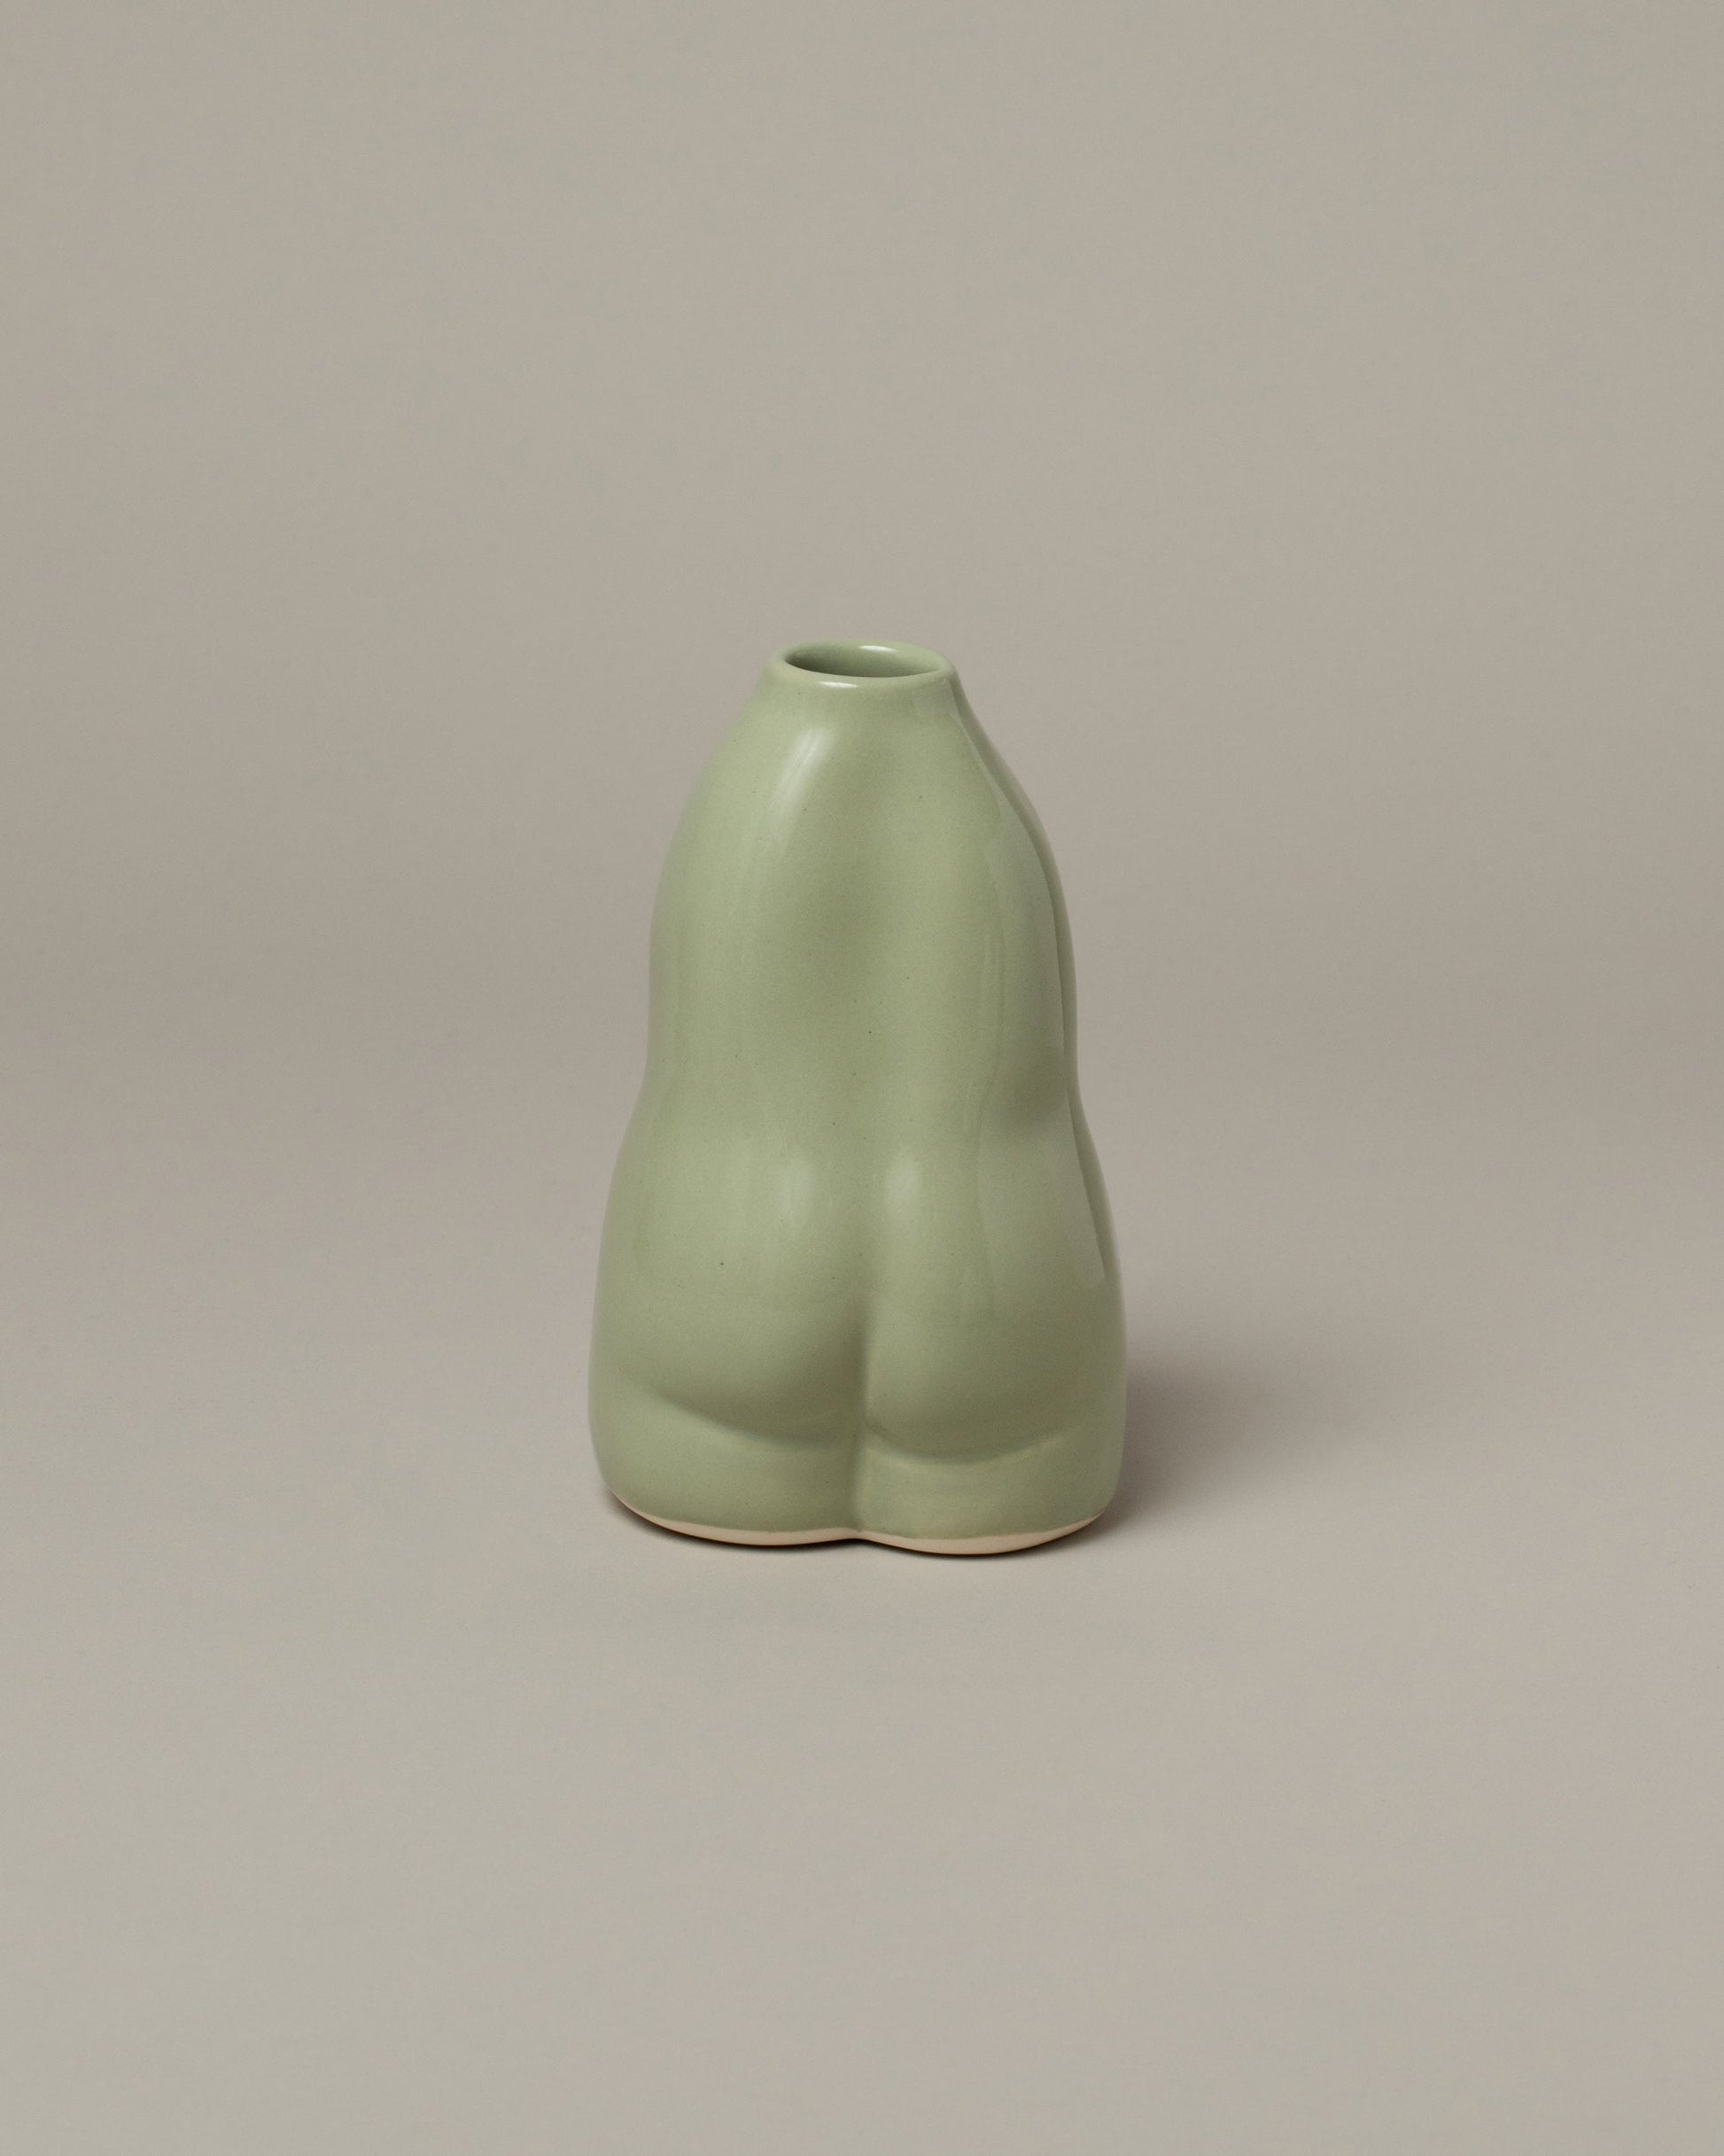 View from the back of the Rachel Saunders Pistache Woman Vase on light color background.